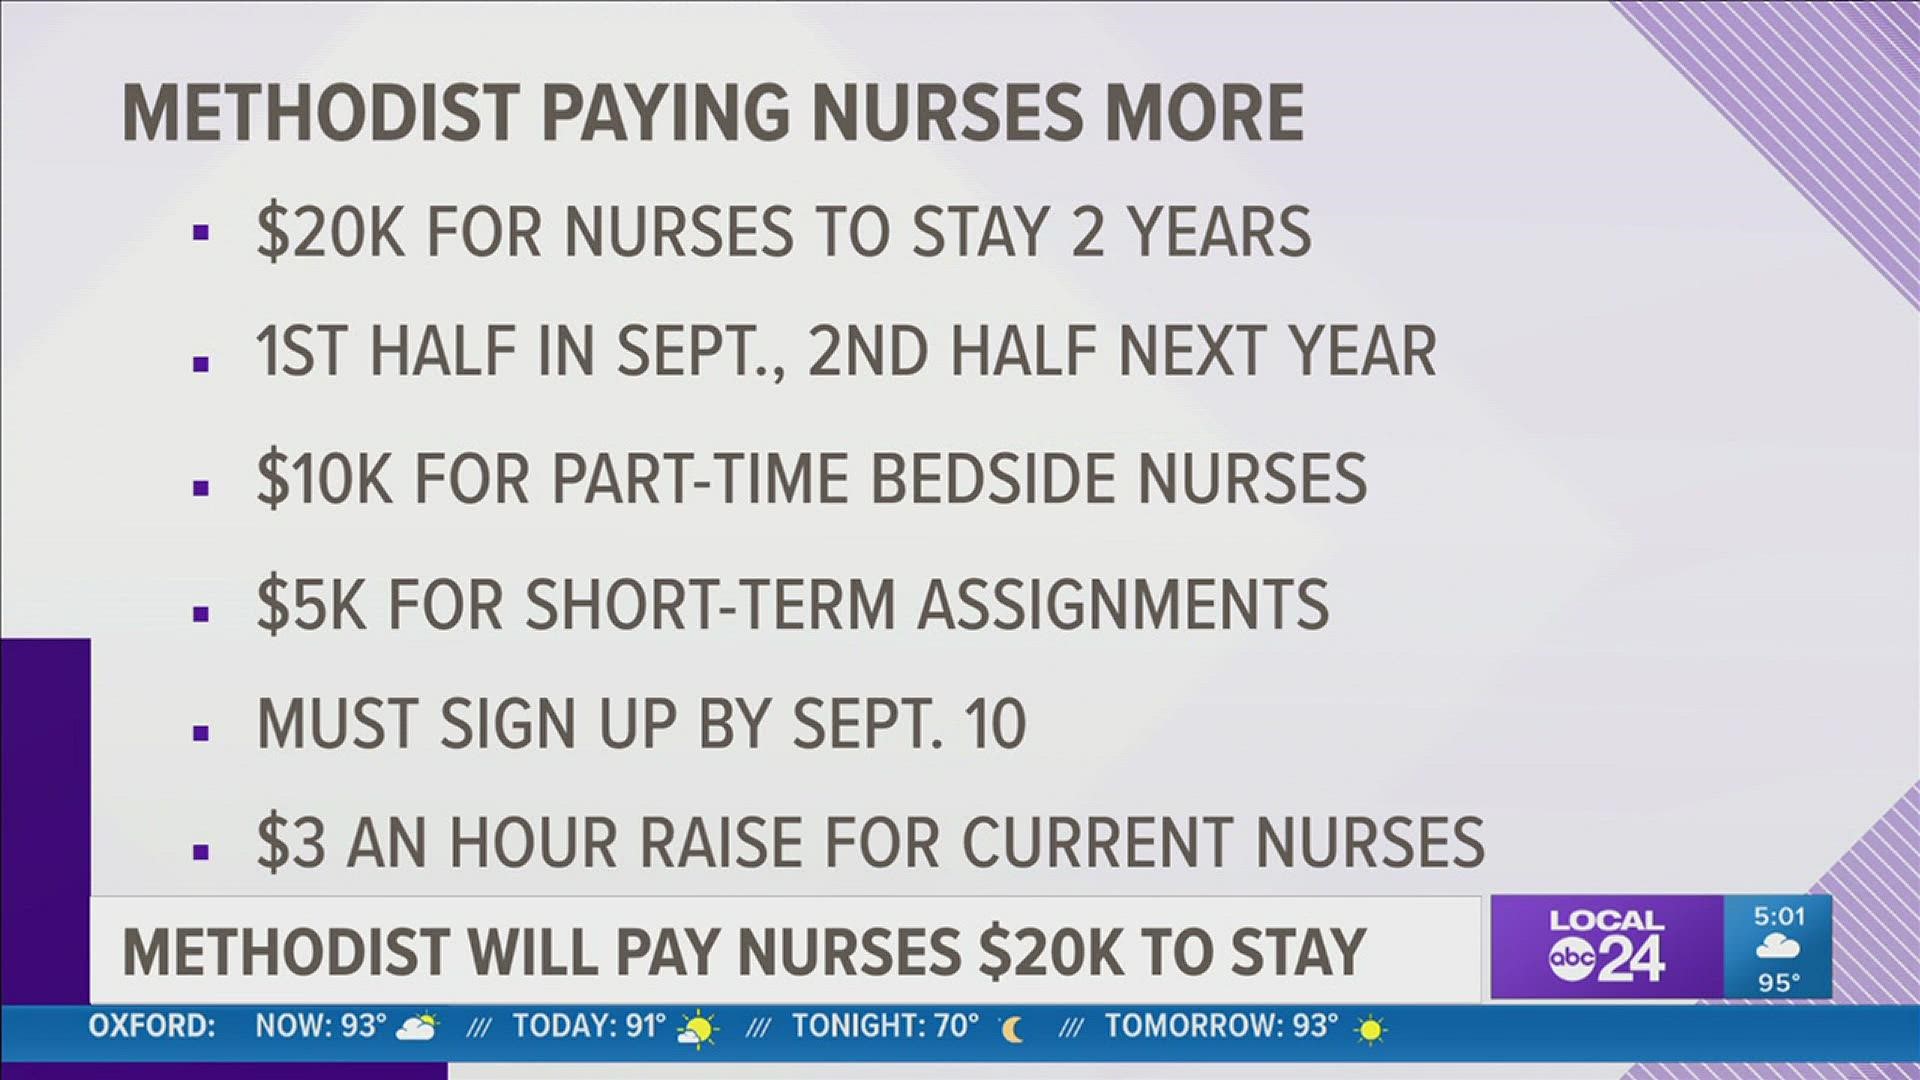 Reports say the healthcare system is offering $20,000 to registered nurses to stay two years, with the first half of the money paid out in September.